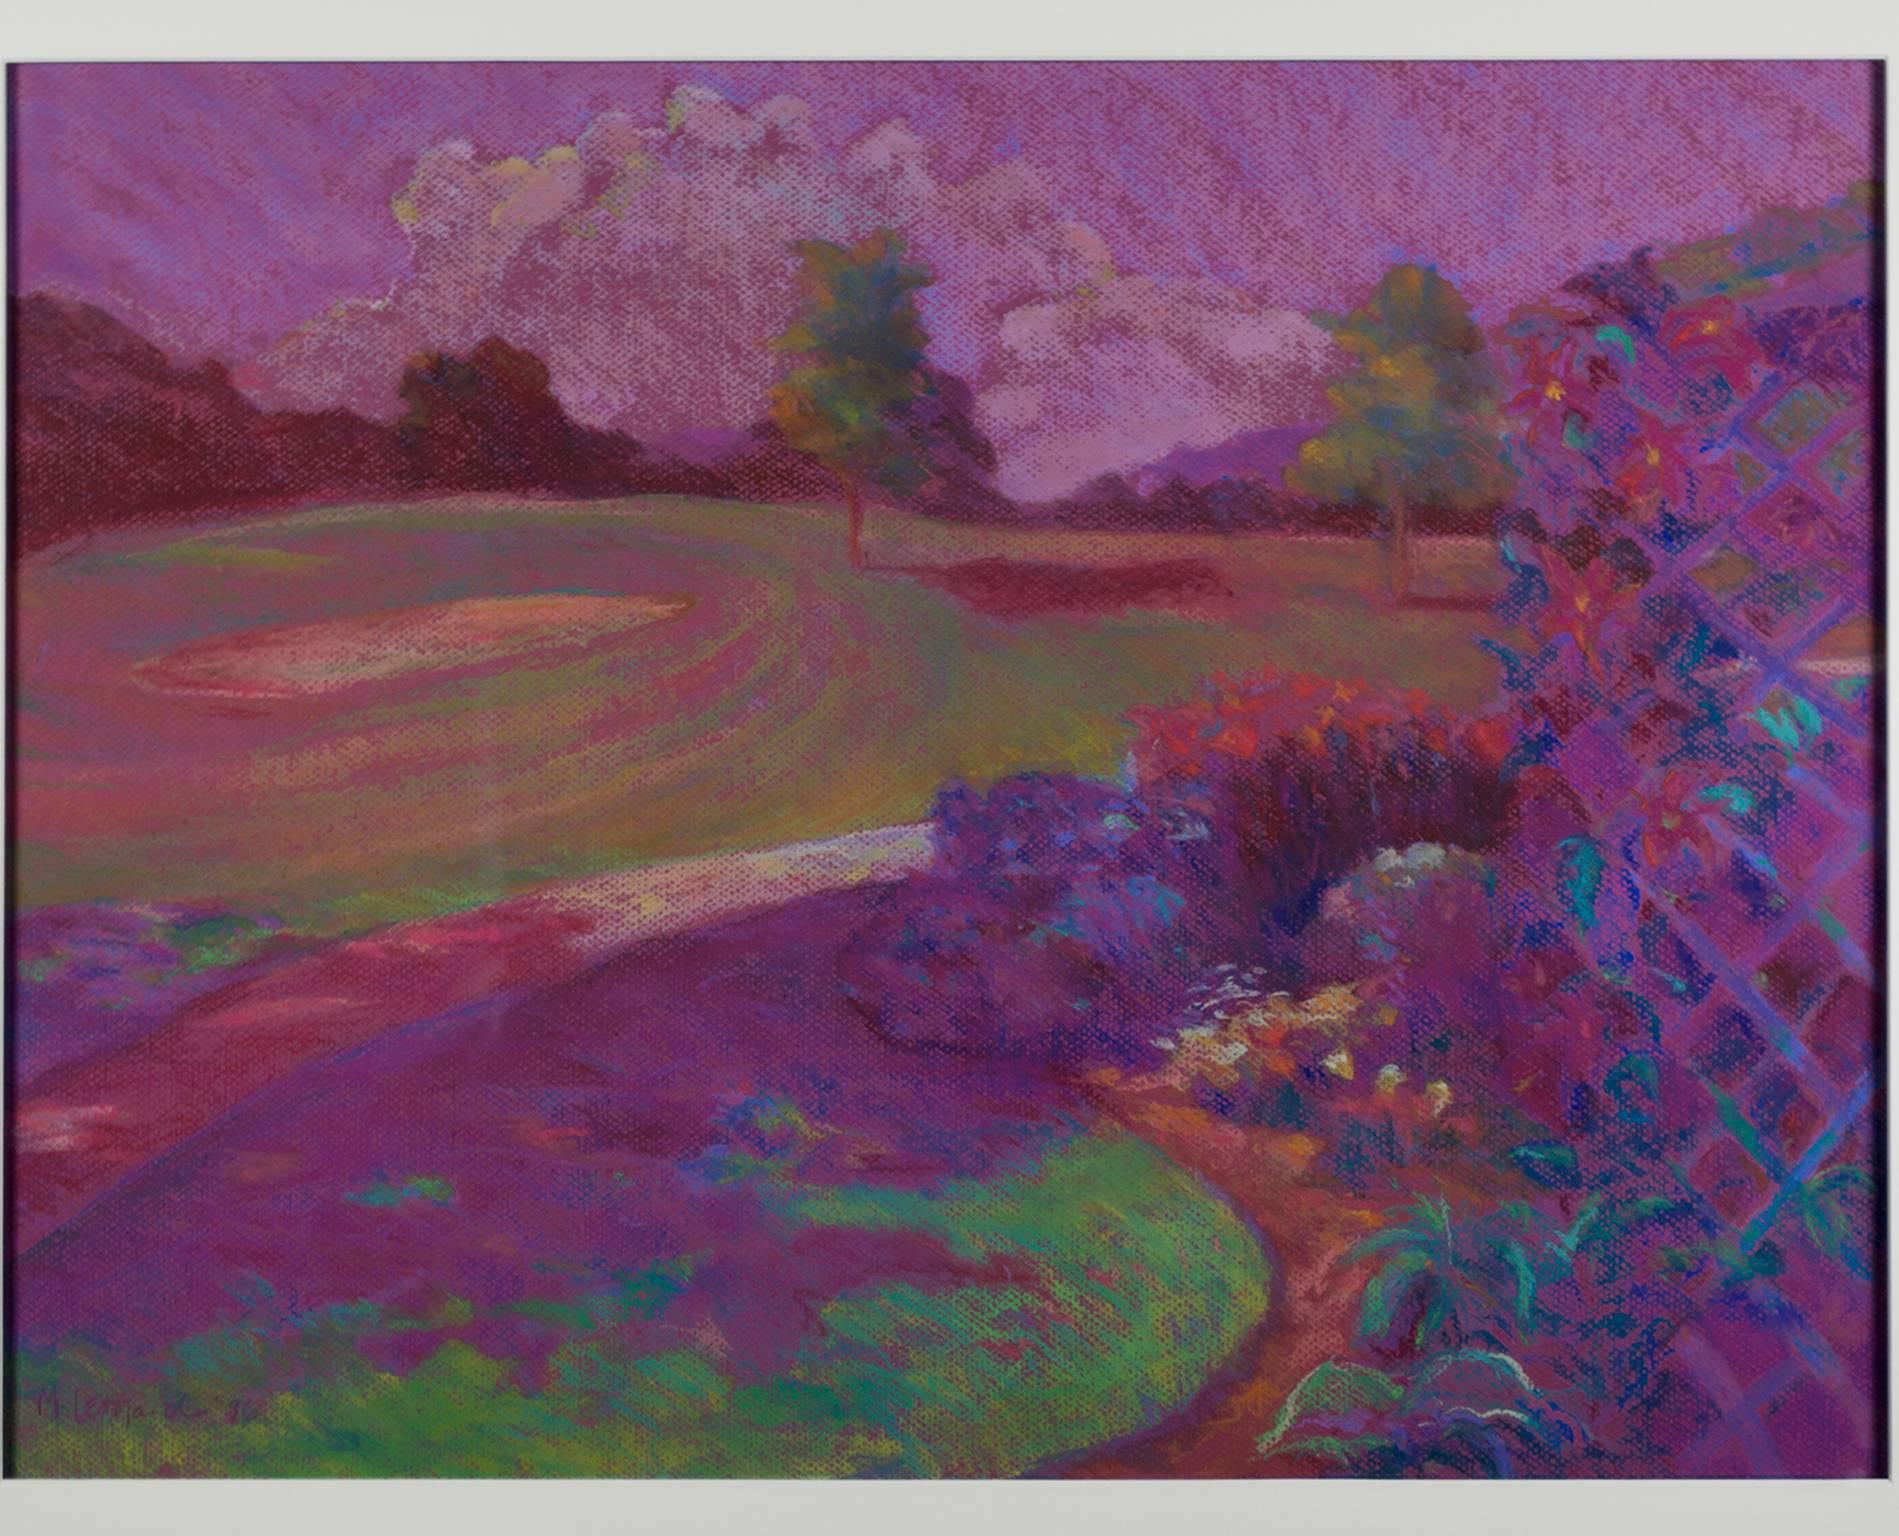 "Trellis of Clemantis Chenequa Country Club" is an original pastel drawing on canson paper signed by the artist Peggy Leonard in the lower left. It depicts a garden and expansive landscape in purple tones. 

19 1/2" x 25 1/2" art
25" x 31"